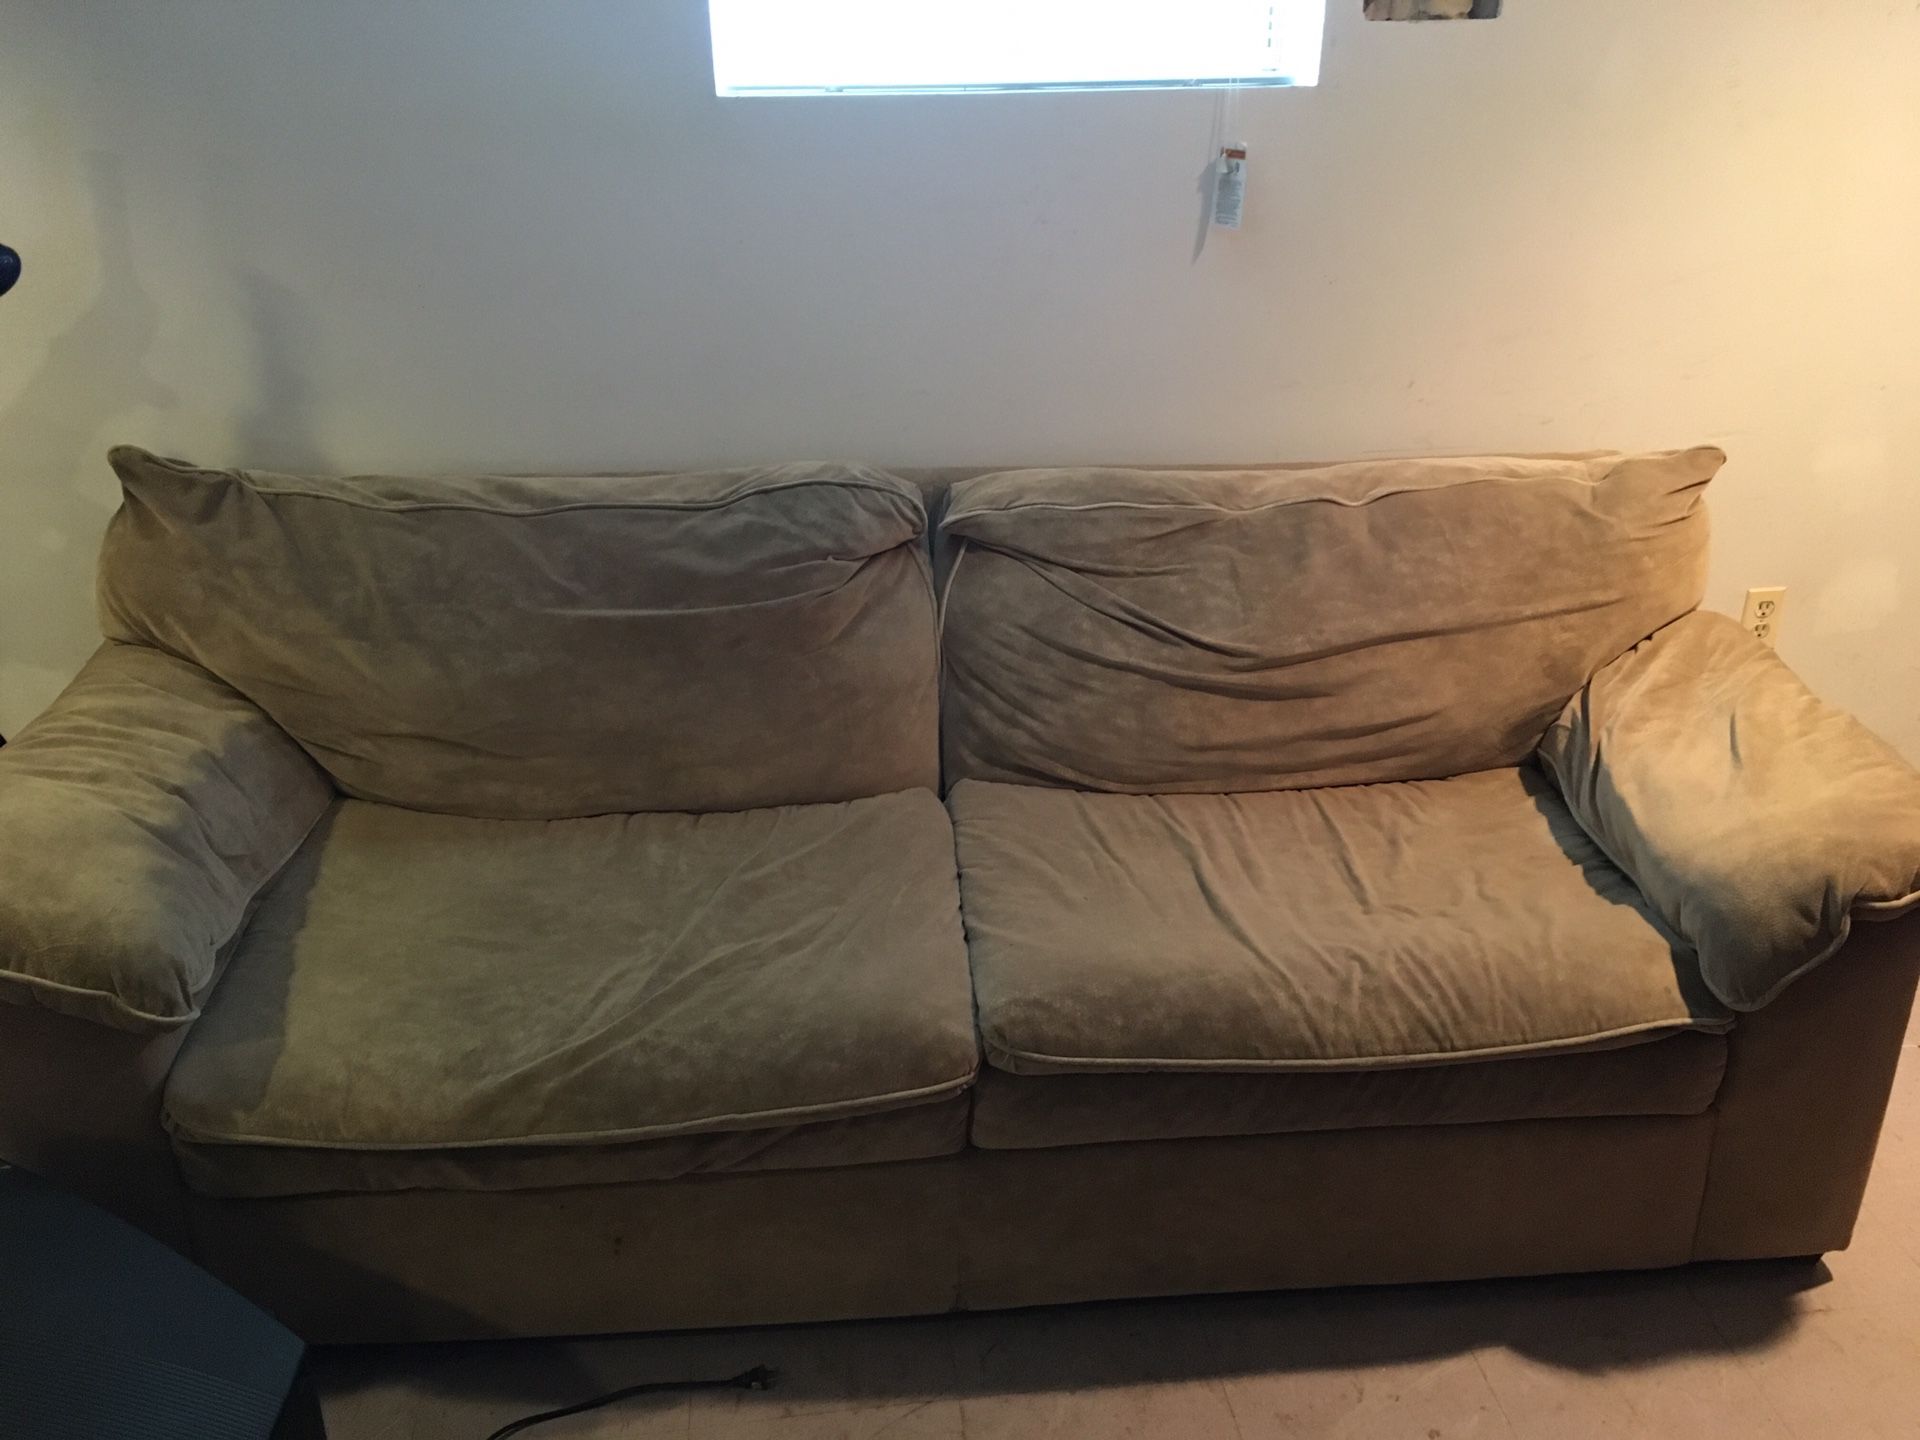 Large sofa for free must load and pick up.